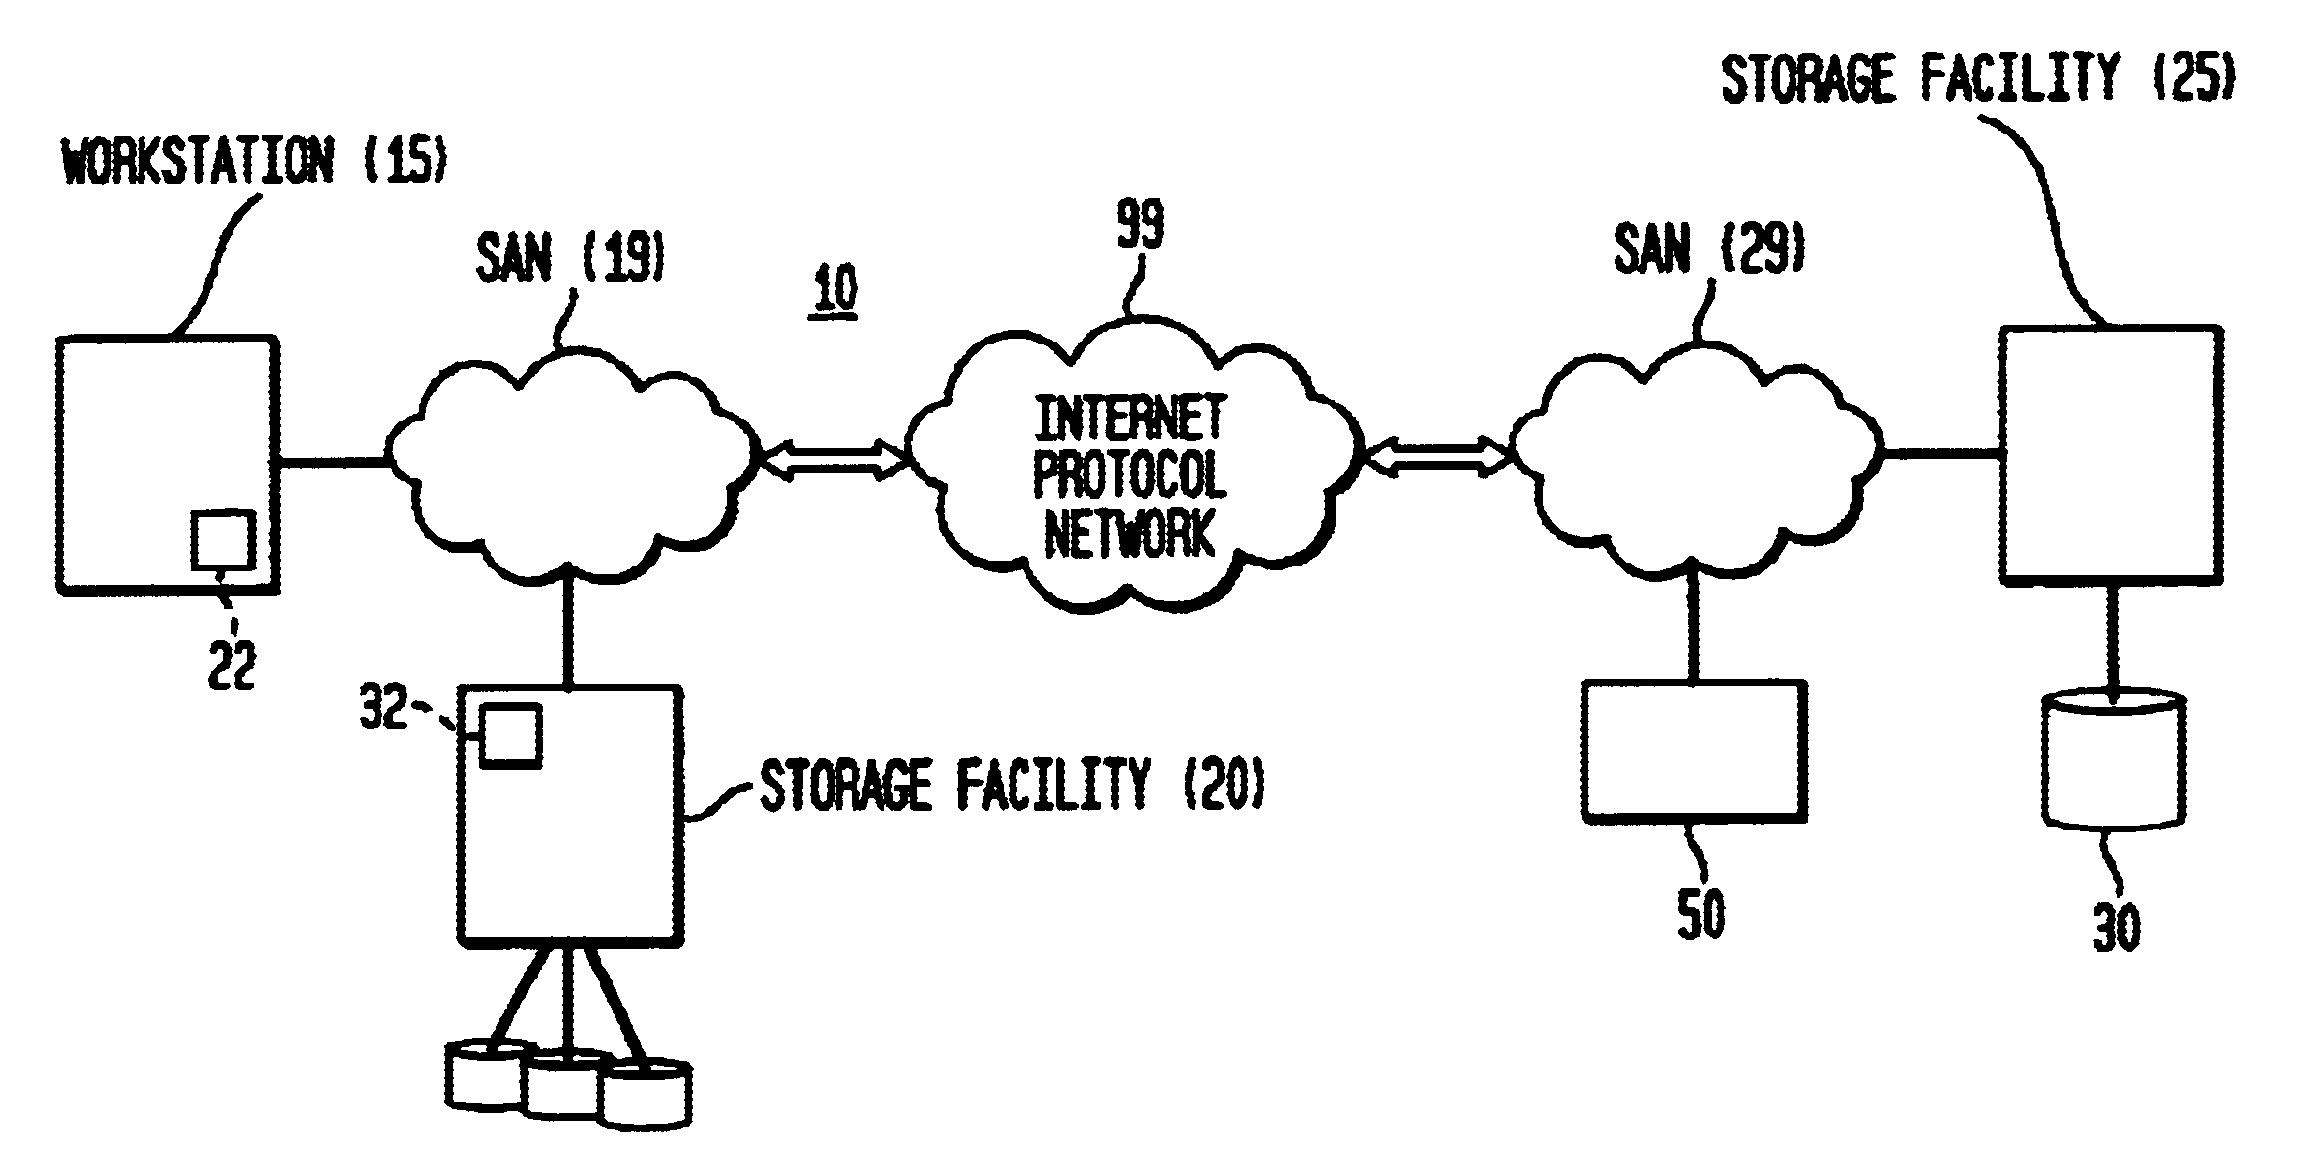 Virtual disk image system with local cache disk for iSCSI communications